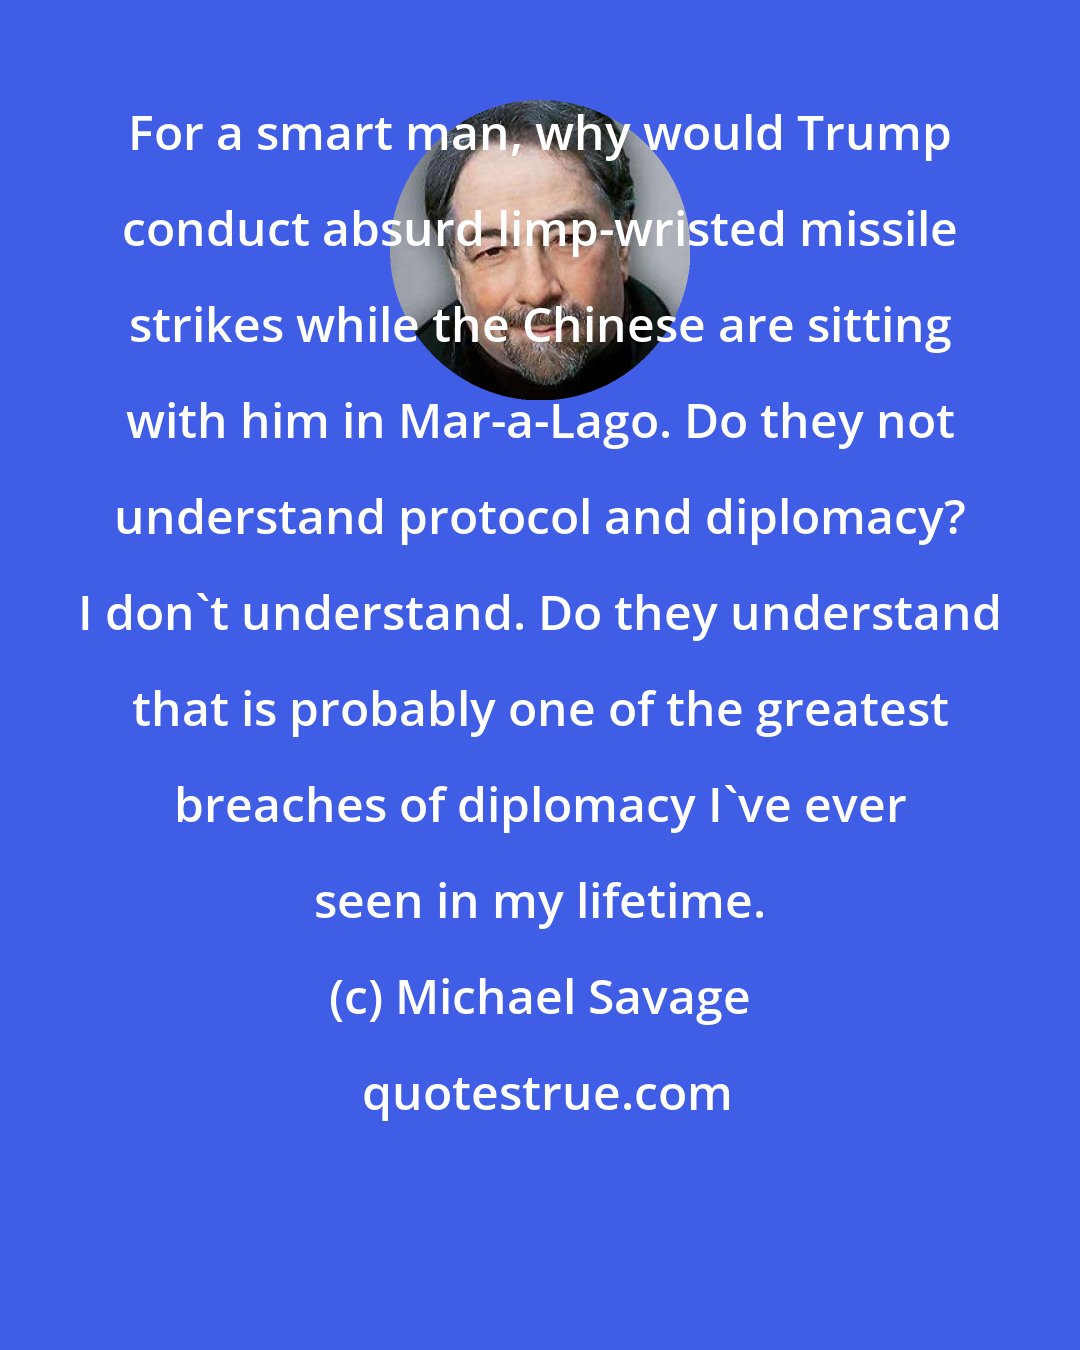 Michael Savage: For a smart man, why would Trump conduct absurd limp-wristed missile strikes while the Chinese are sitting with him in Mar-a-Lago. Do they not understand protocol and diplomacy? I don't understand. Do they understand that is probably one of the greatest breaches of diplomacy I've ever seen in my lifetime.